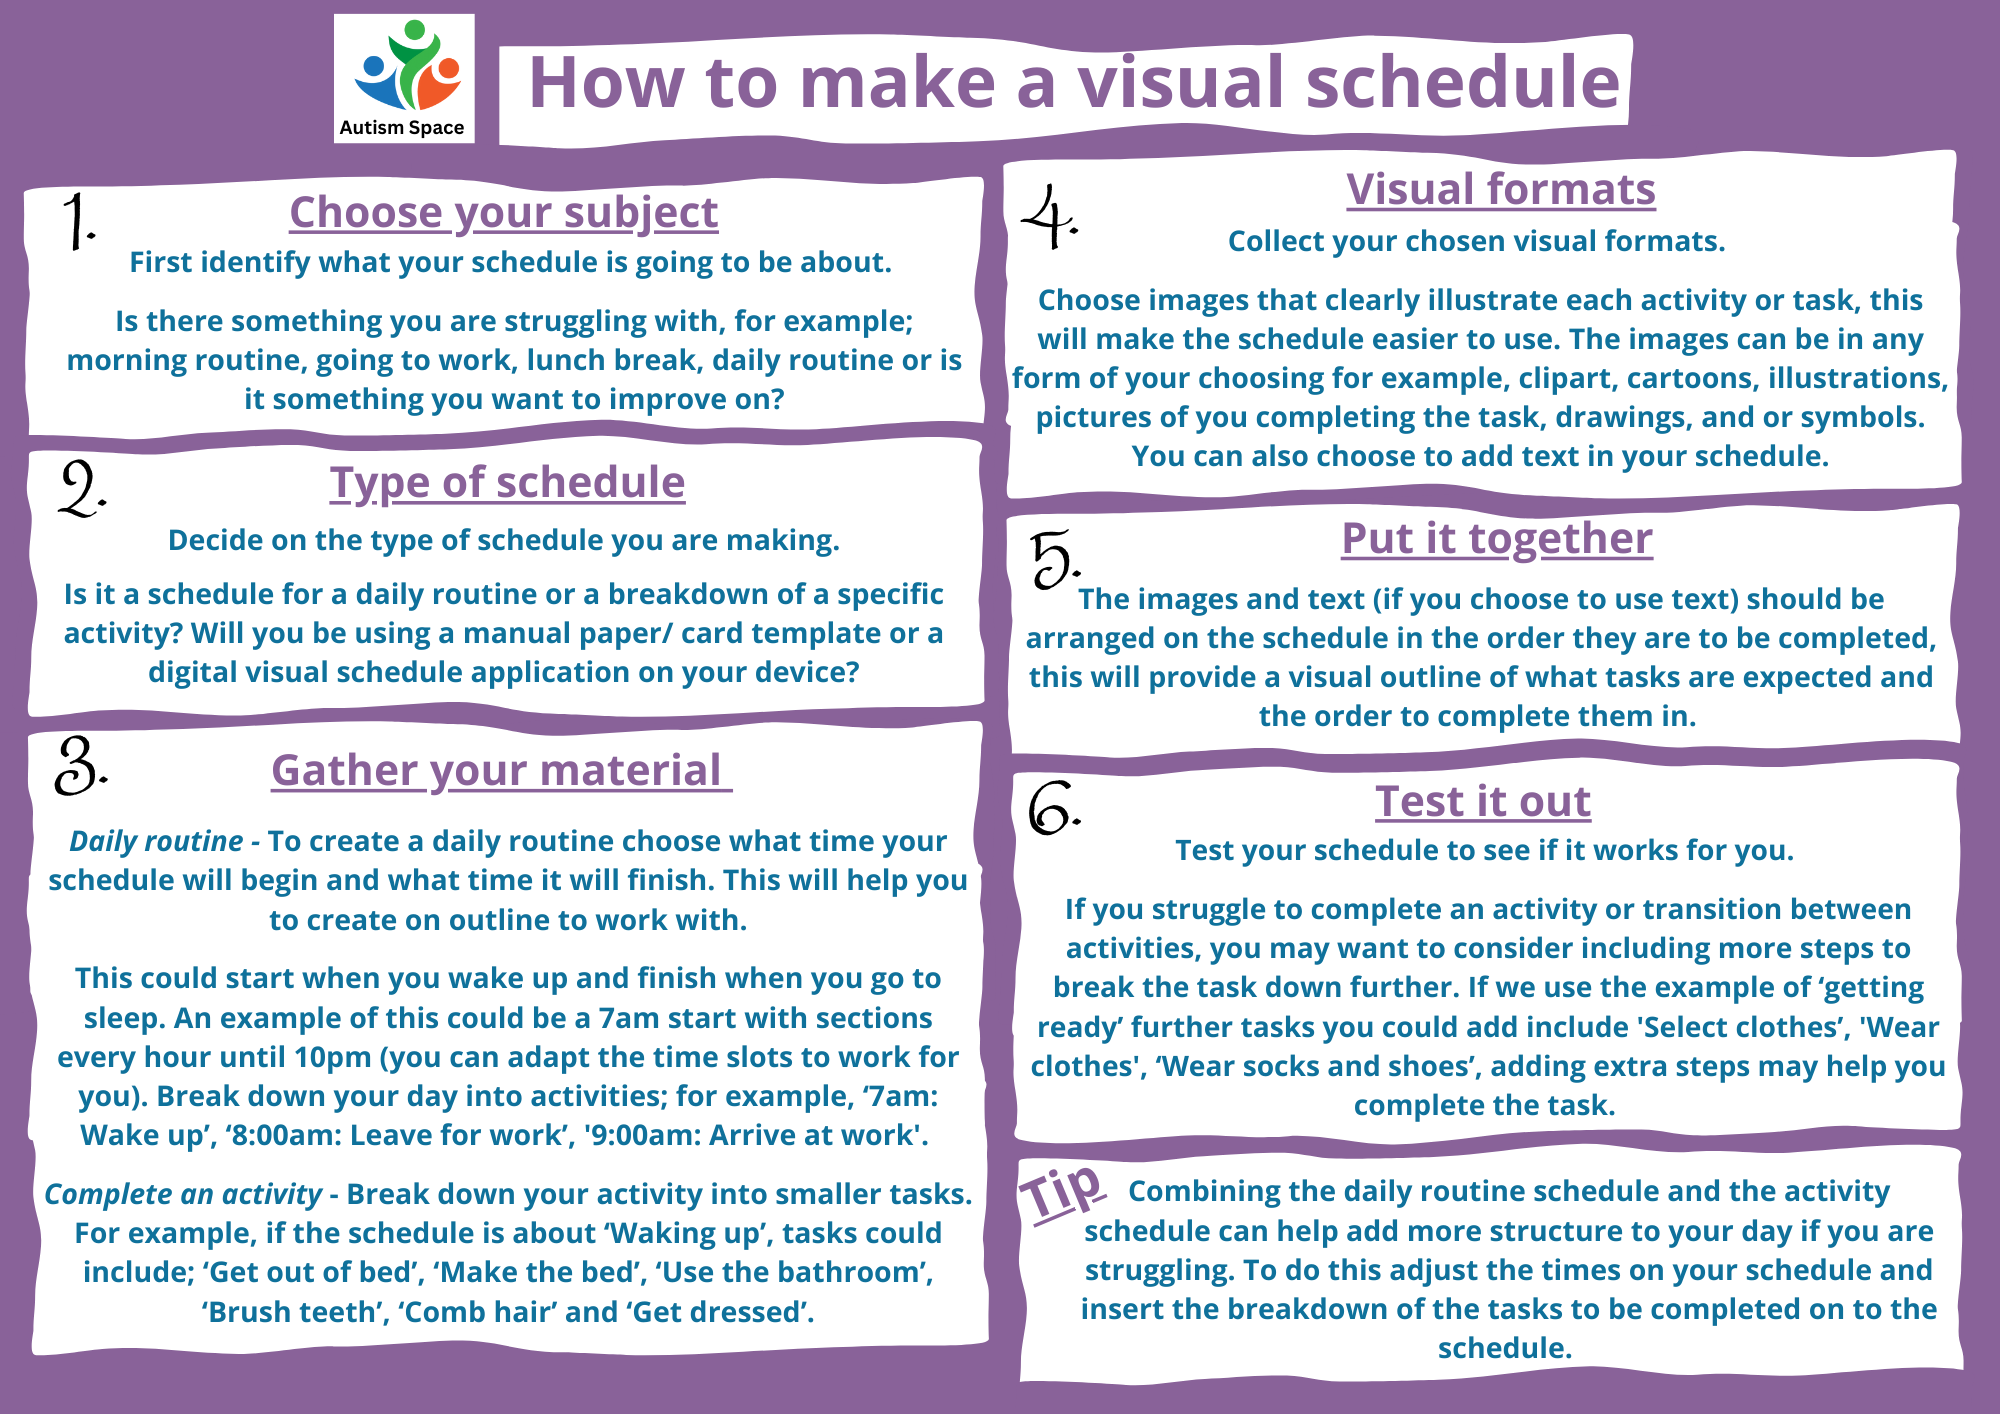 How to make a visual schedule